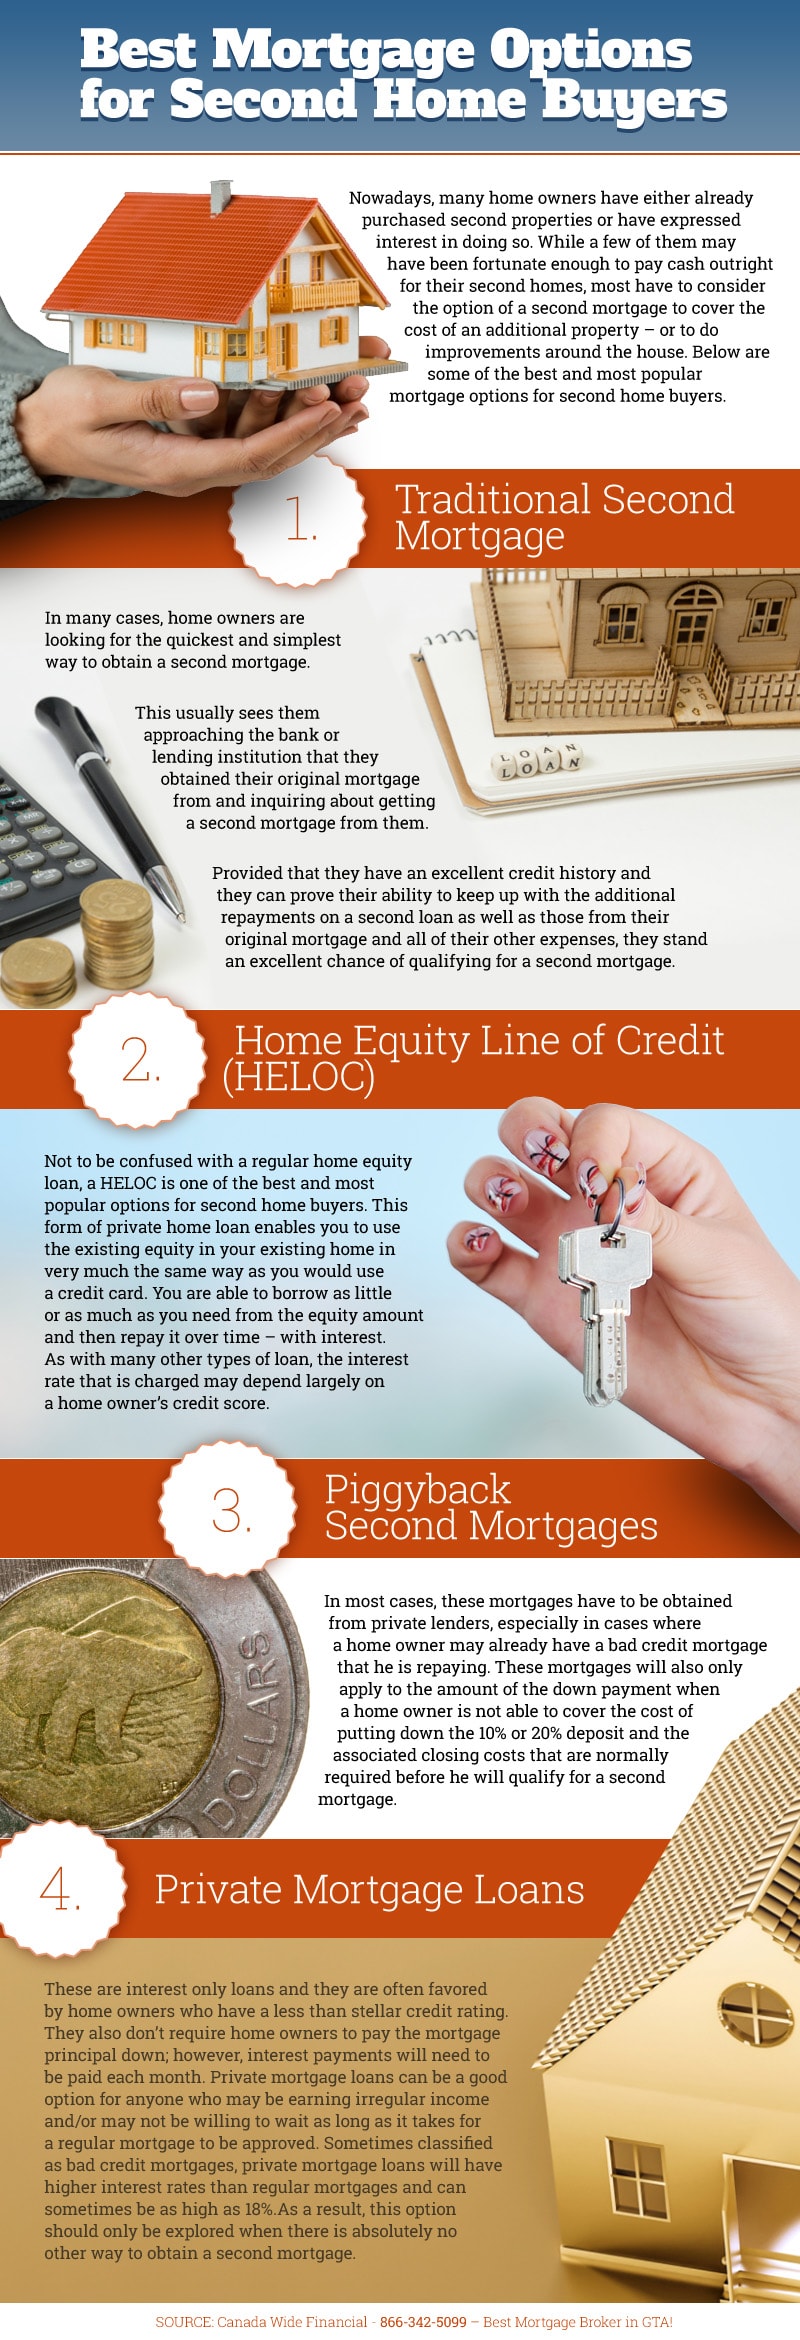 Best Mortgage Options for Second Home Buyers - Infographic